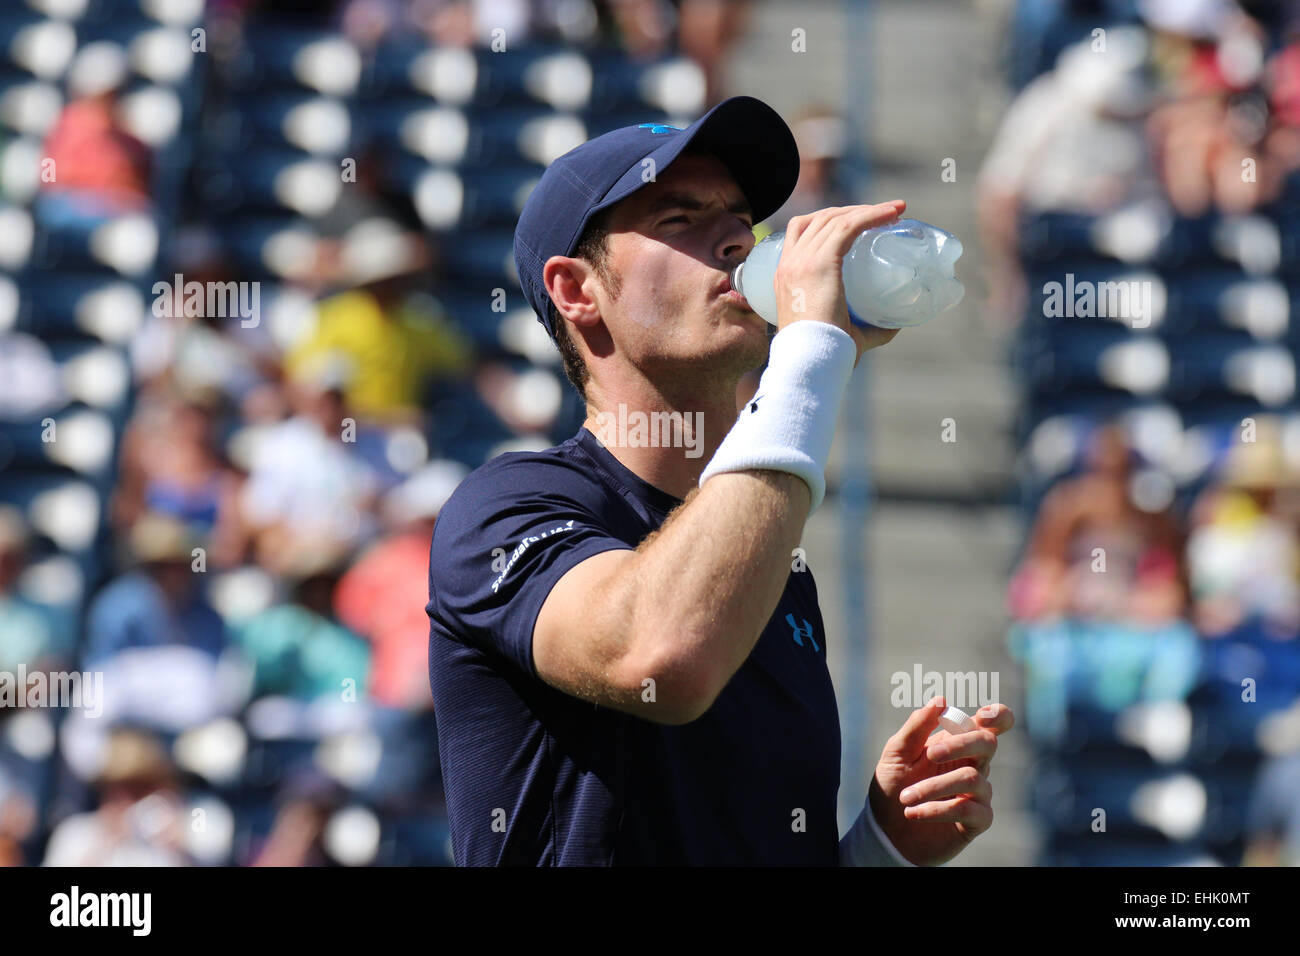 Indian Wells, California 14th March, 2015  British tennis player Andy Murray defeats Vasek Pospisil of Canada in the Men's Singles 2nd Round (score 6-1 6-3). Credit: Werner Fotos/Alamy Live News Stock Photo